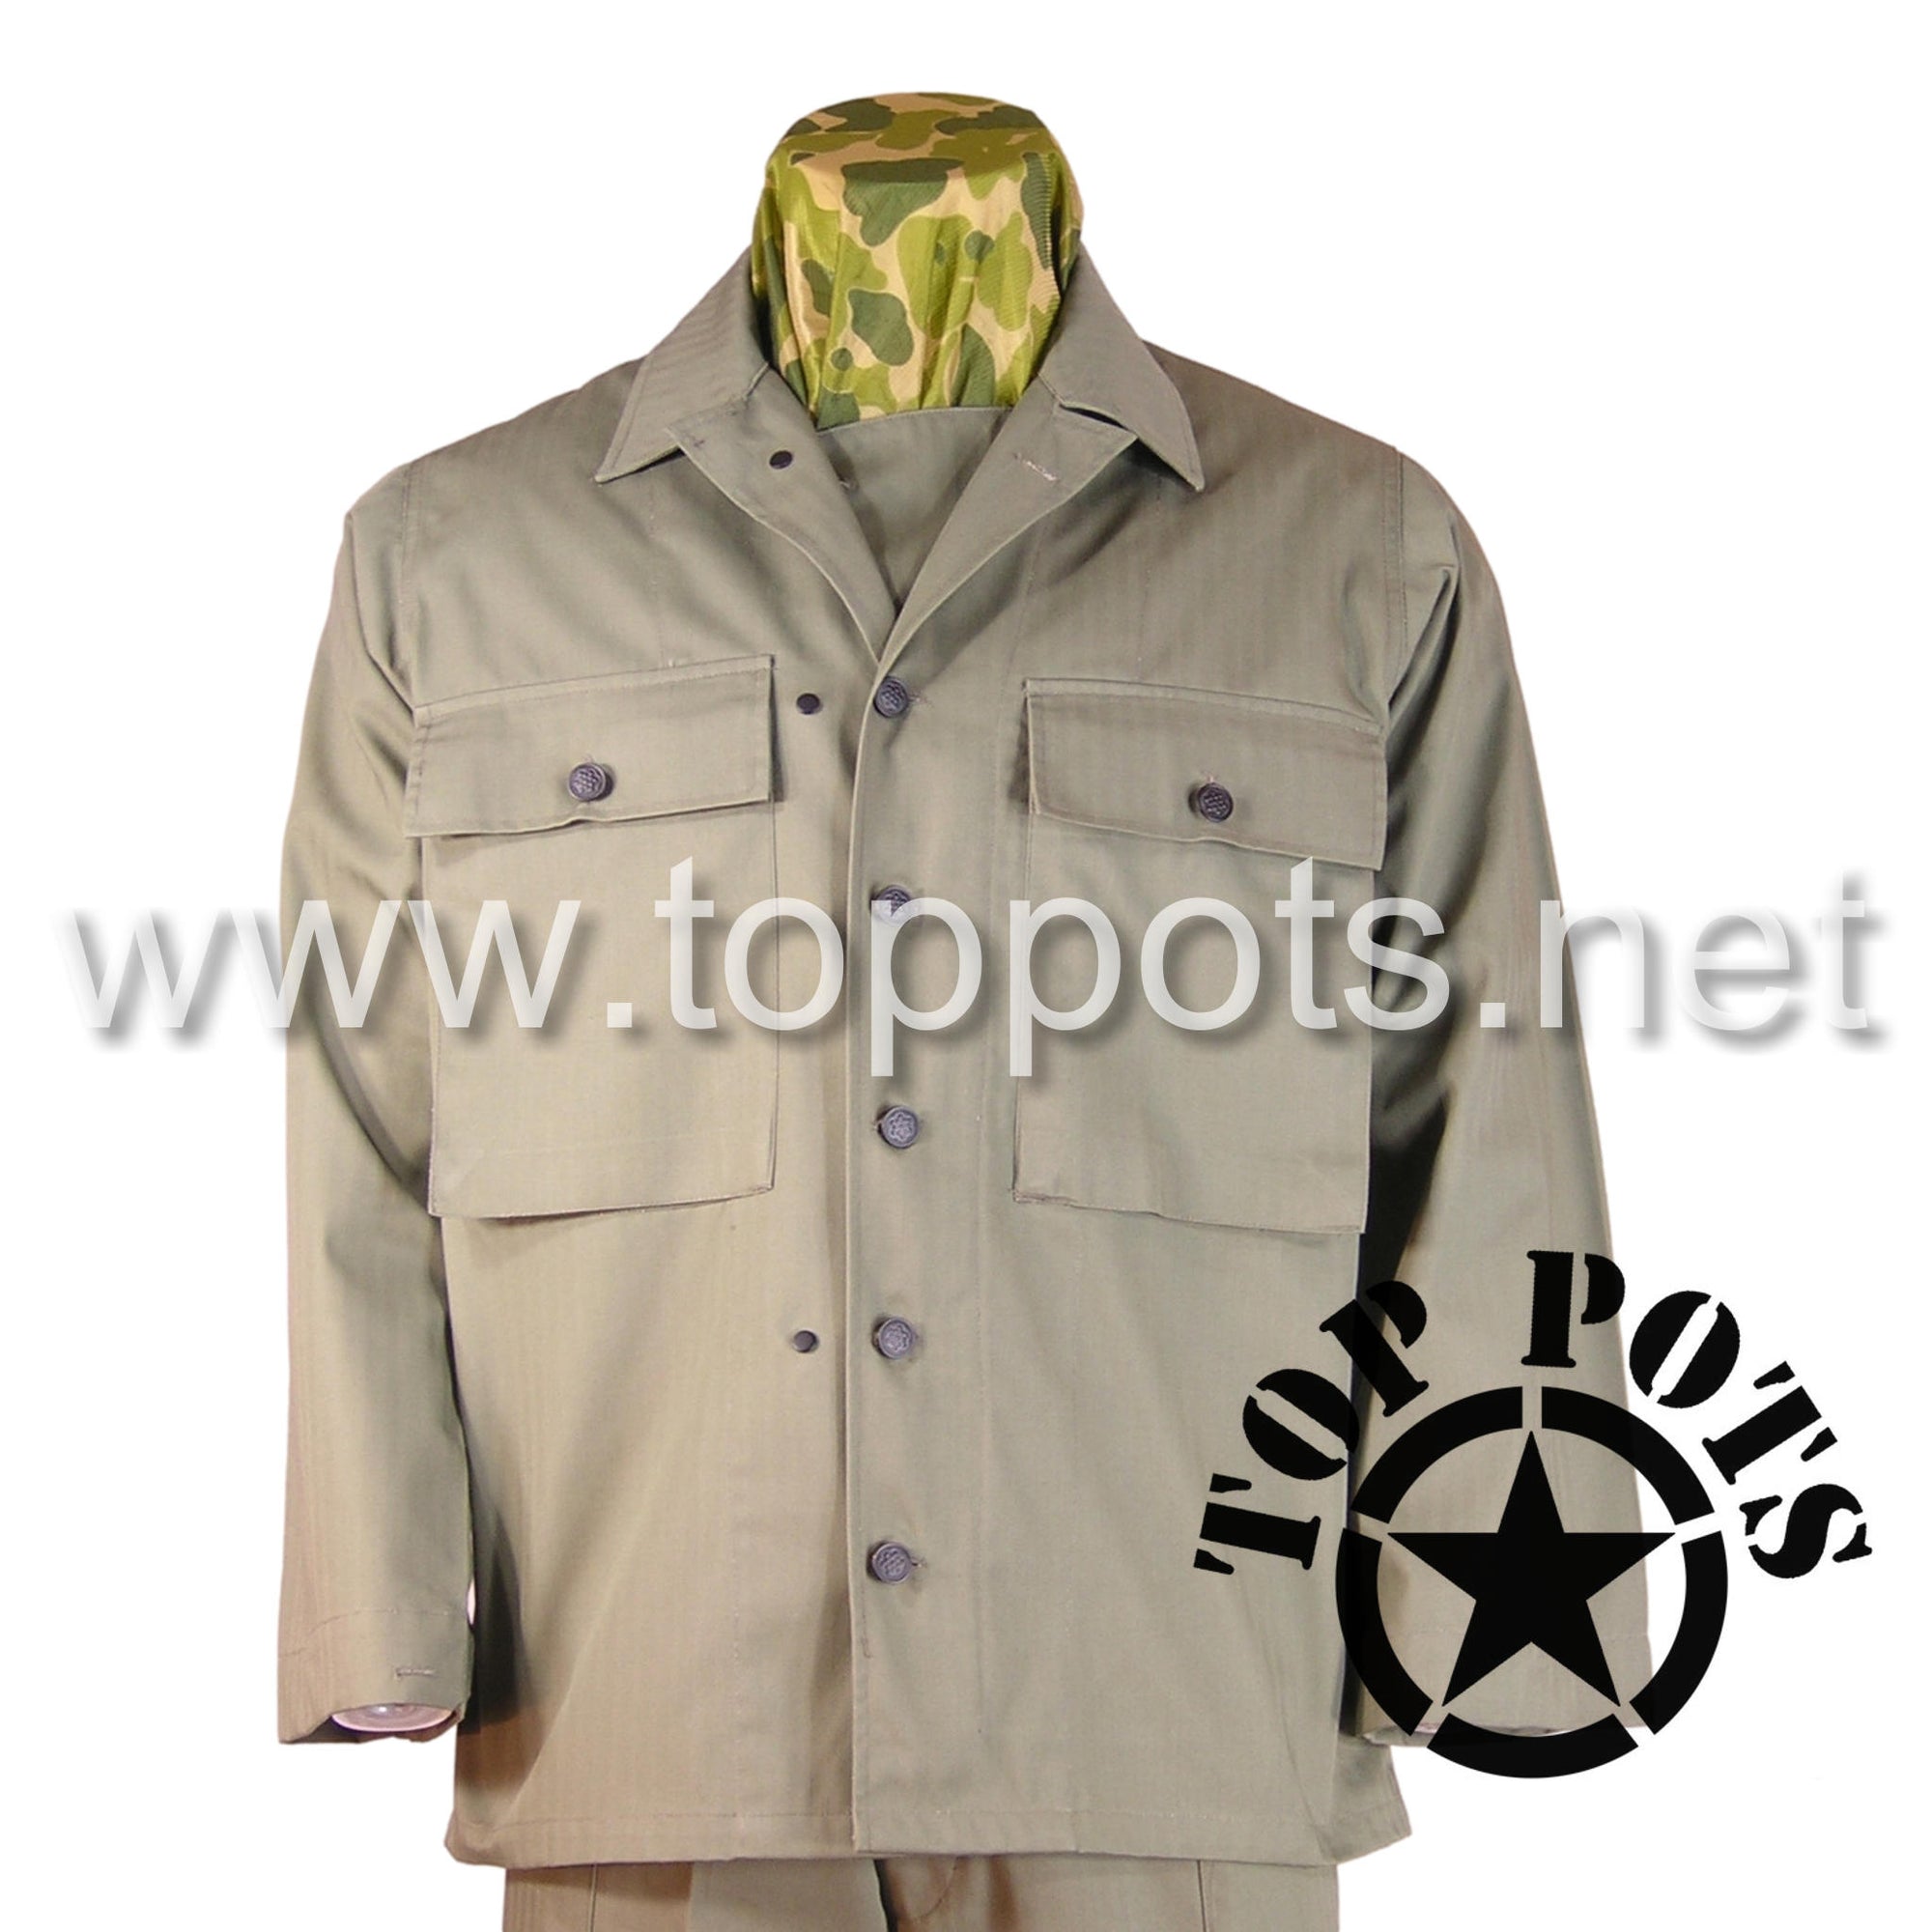 WWII US Army Reproduction M1942 Cotton HBT Uniform Herring Bone Twill Field Fatigue Jacket (JACKET ONLY)